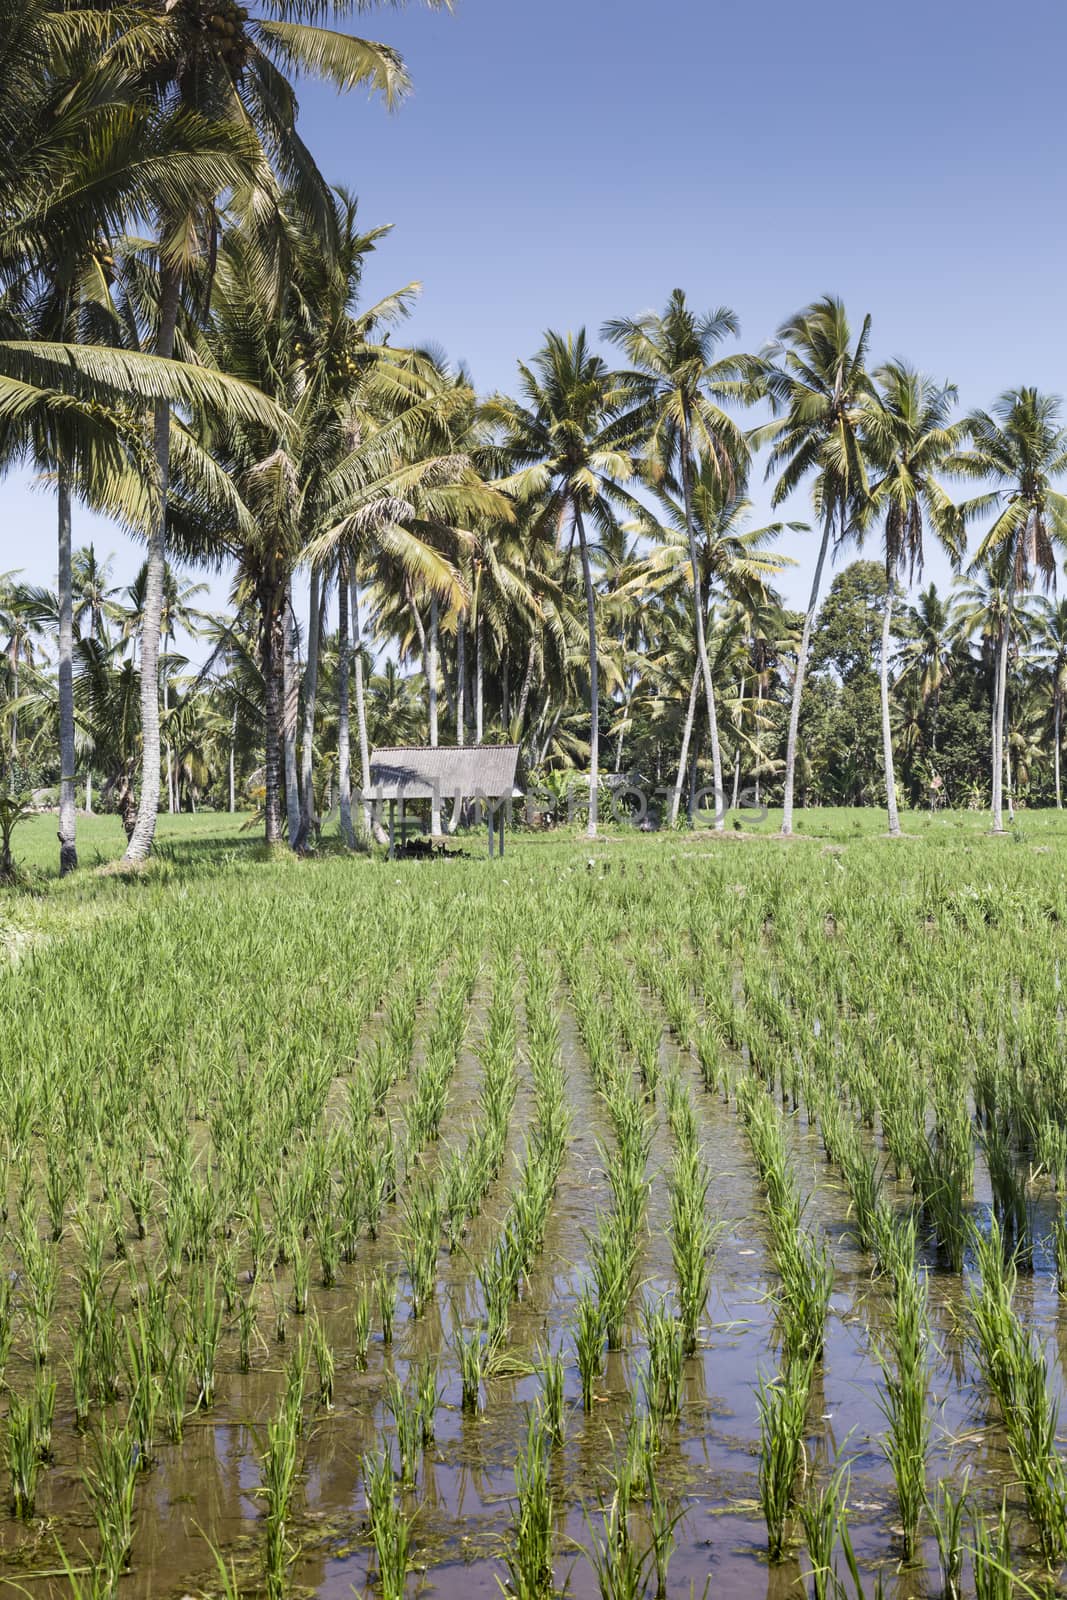 Bali terrace rice fields with palm trees behind.